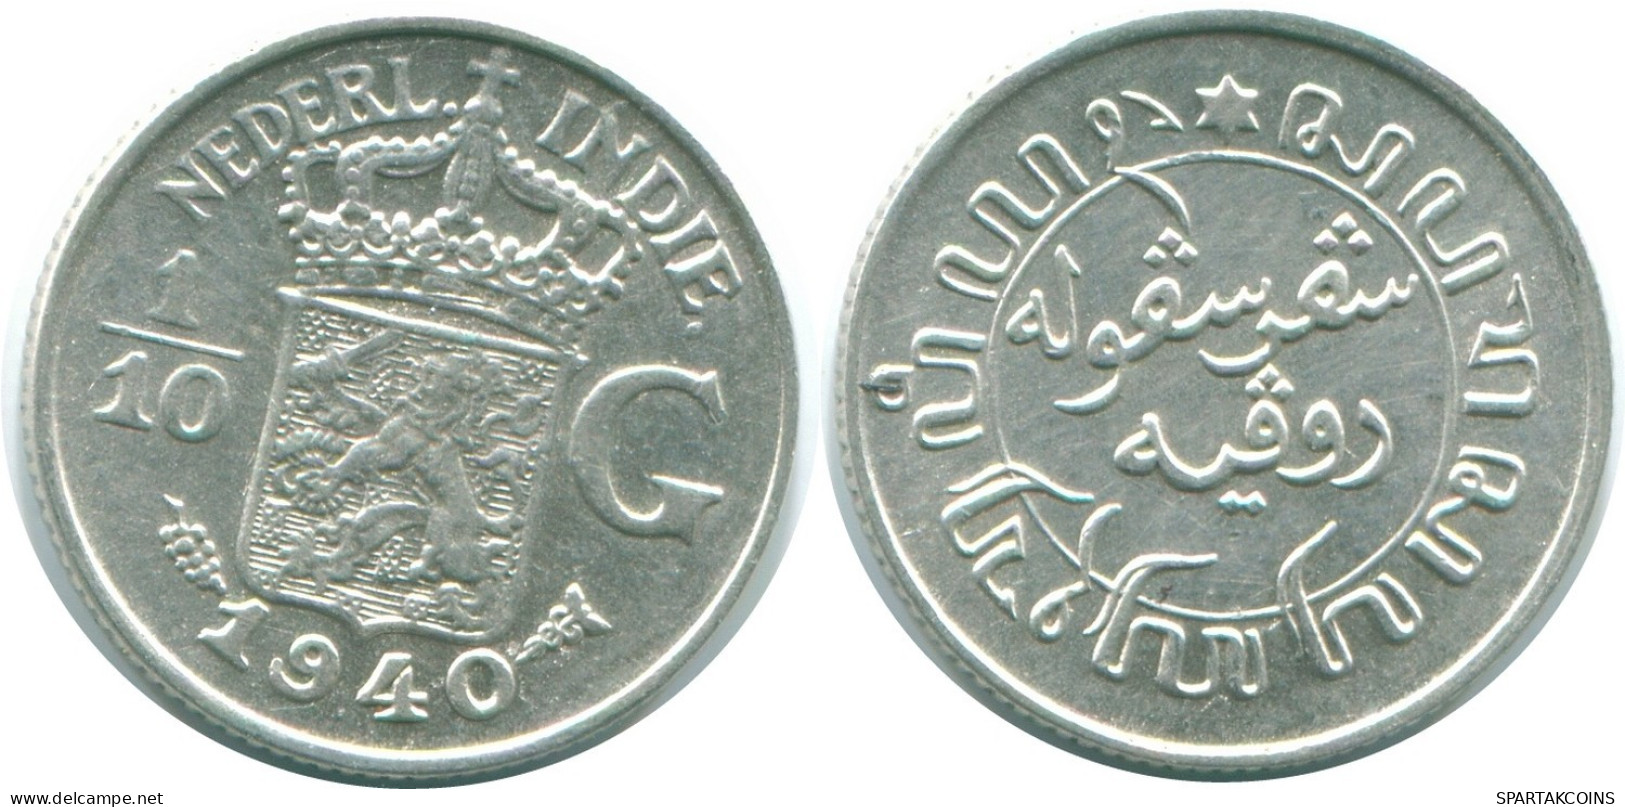 1/10 GULDEN 1940 NETHERLANDS EAST INDIES SILVER Colonial Coin #NL13530.3.U.A - Indes Neerlandesas